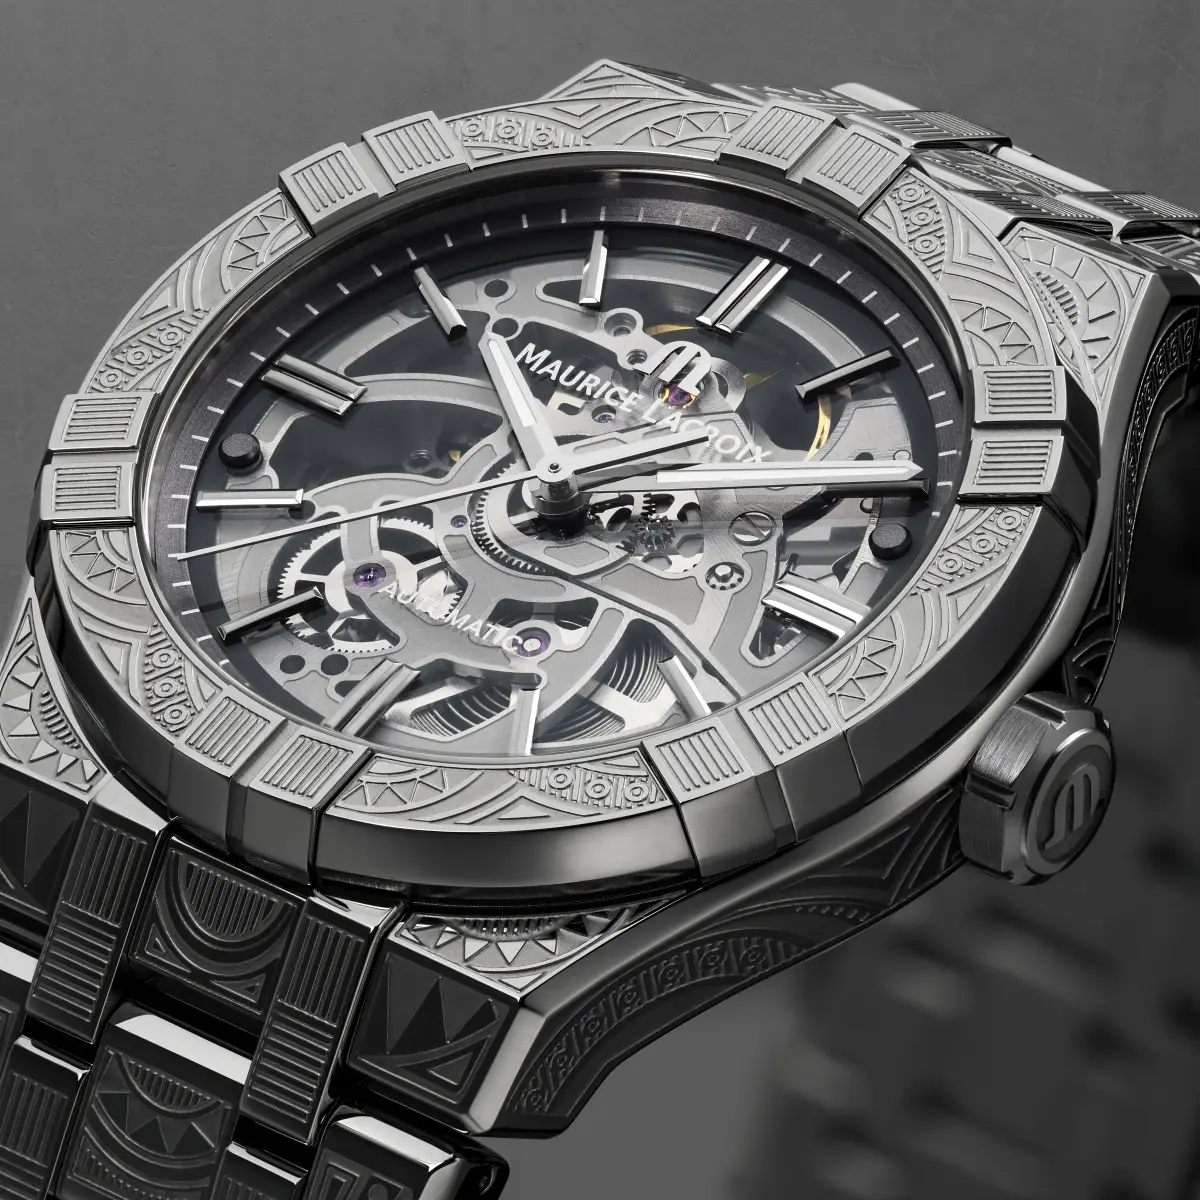 Maurice Lacroix AIKON Skeleton Urban Tribe Limited Edition